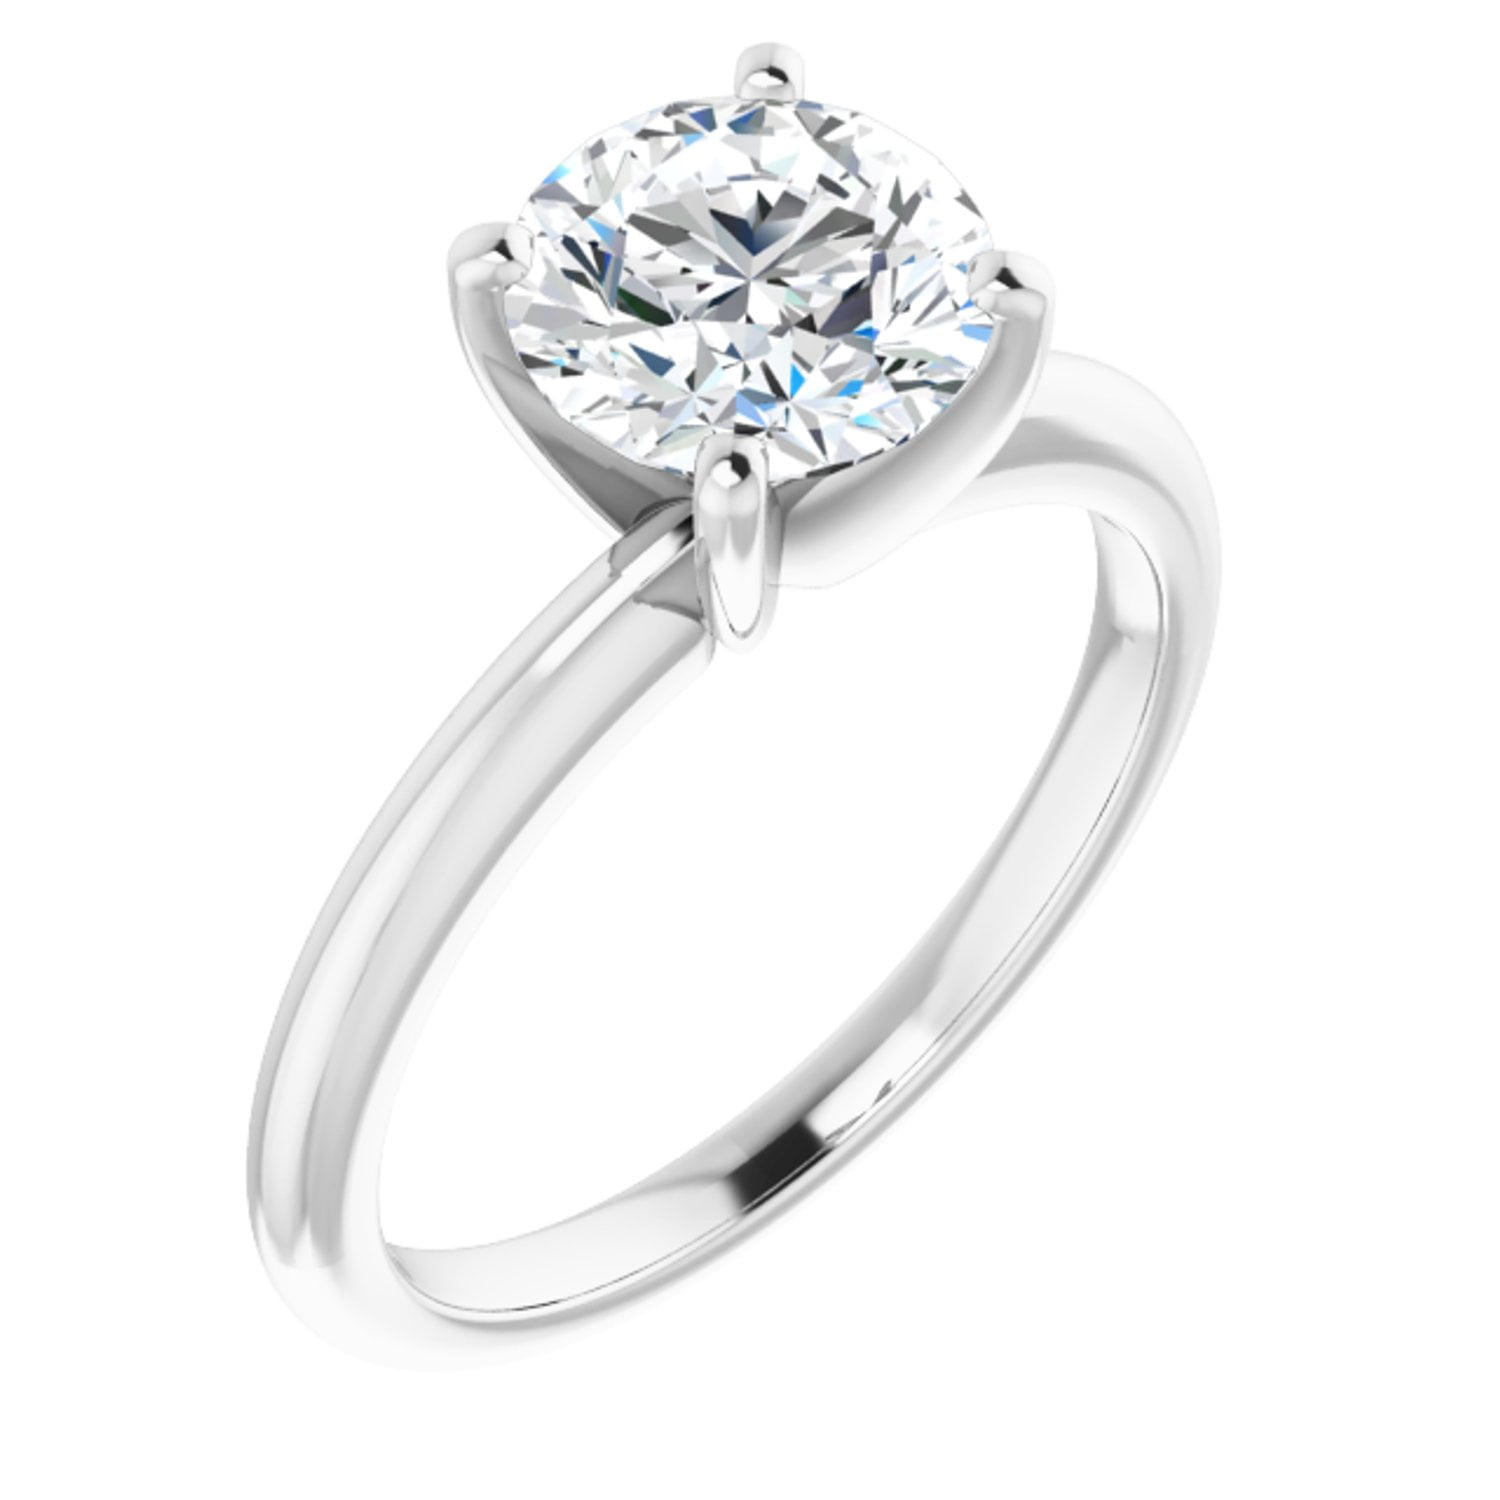 1.50 Ct Round Cut Diamond Solitaire Engagement Ring 14k White Gold Over Size 7